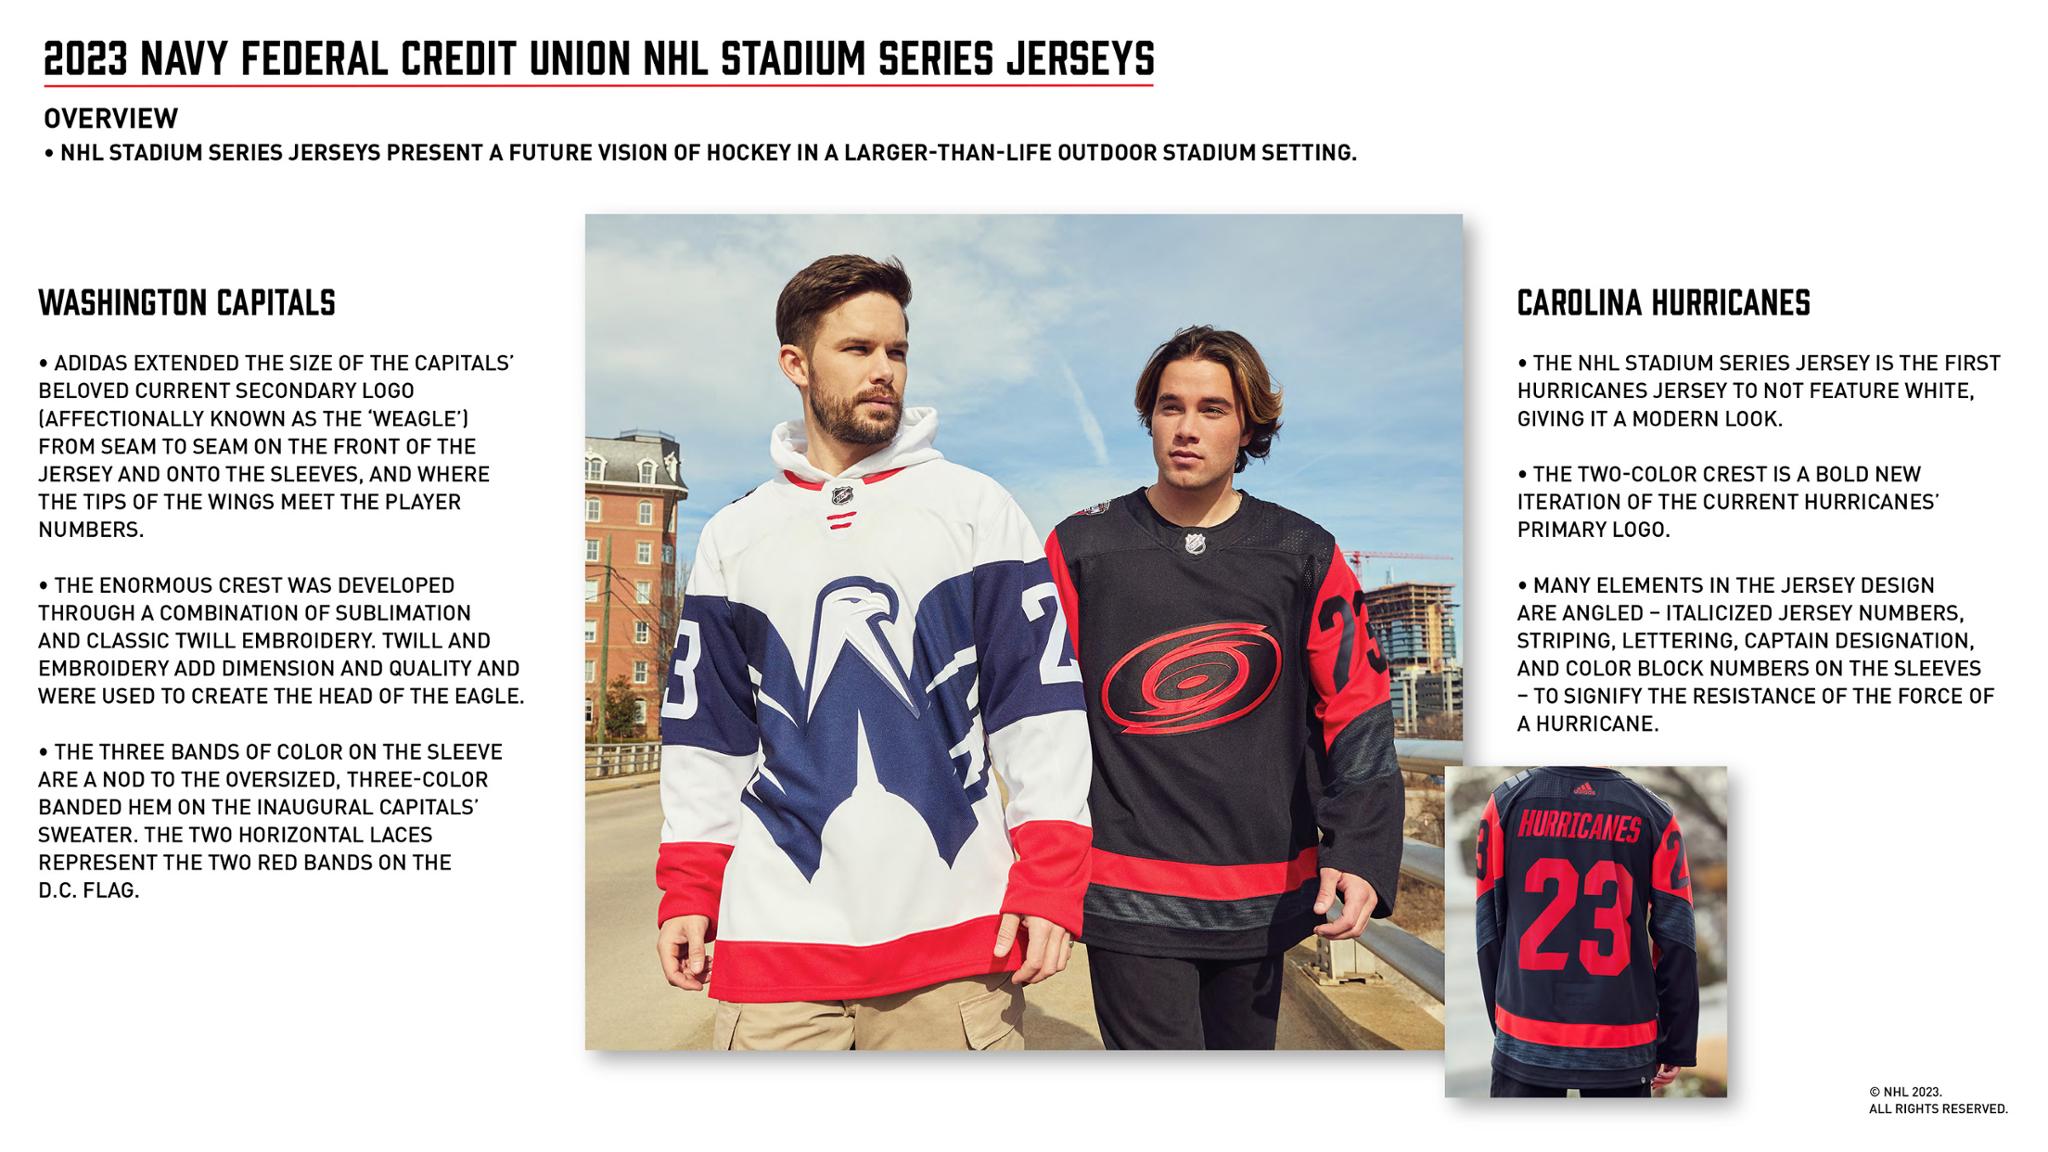 The Capitals will wear their Stadium Series jerseys in one other regular- season game